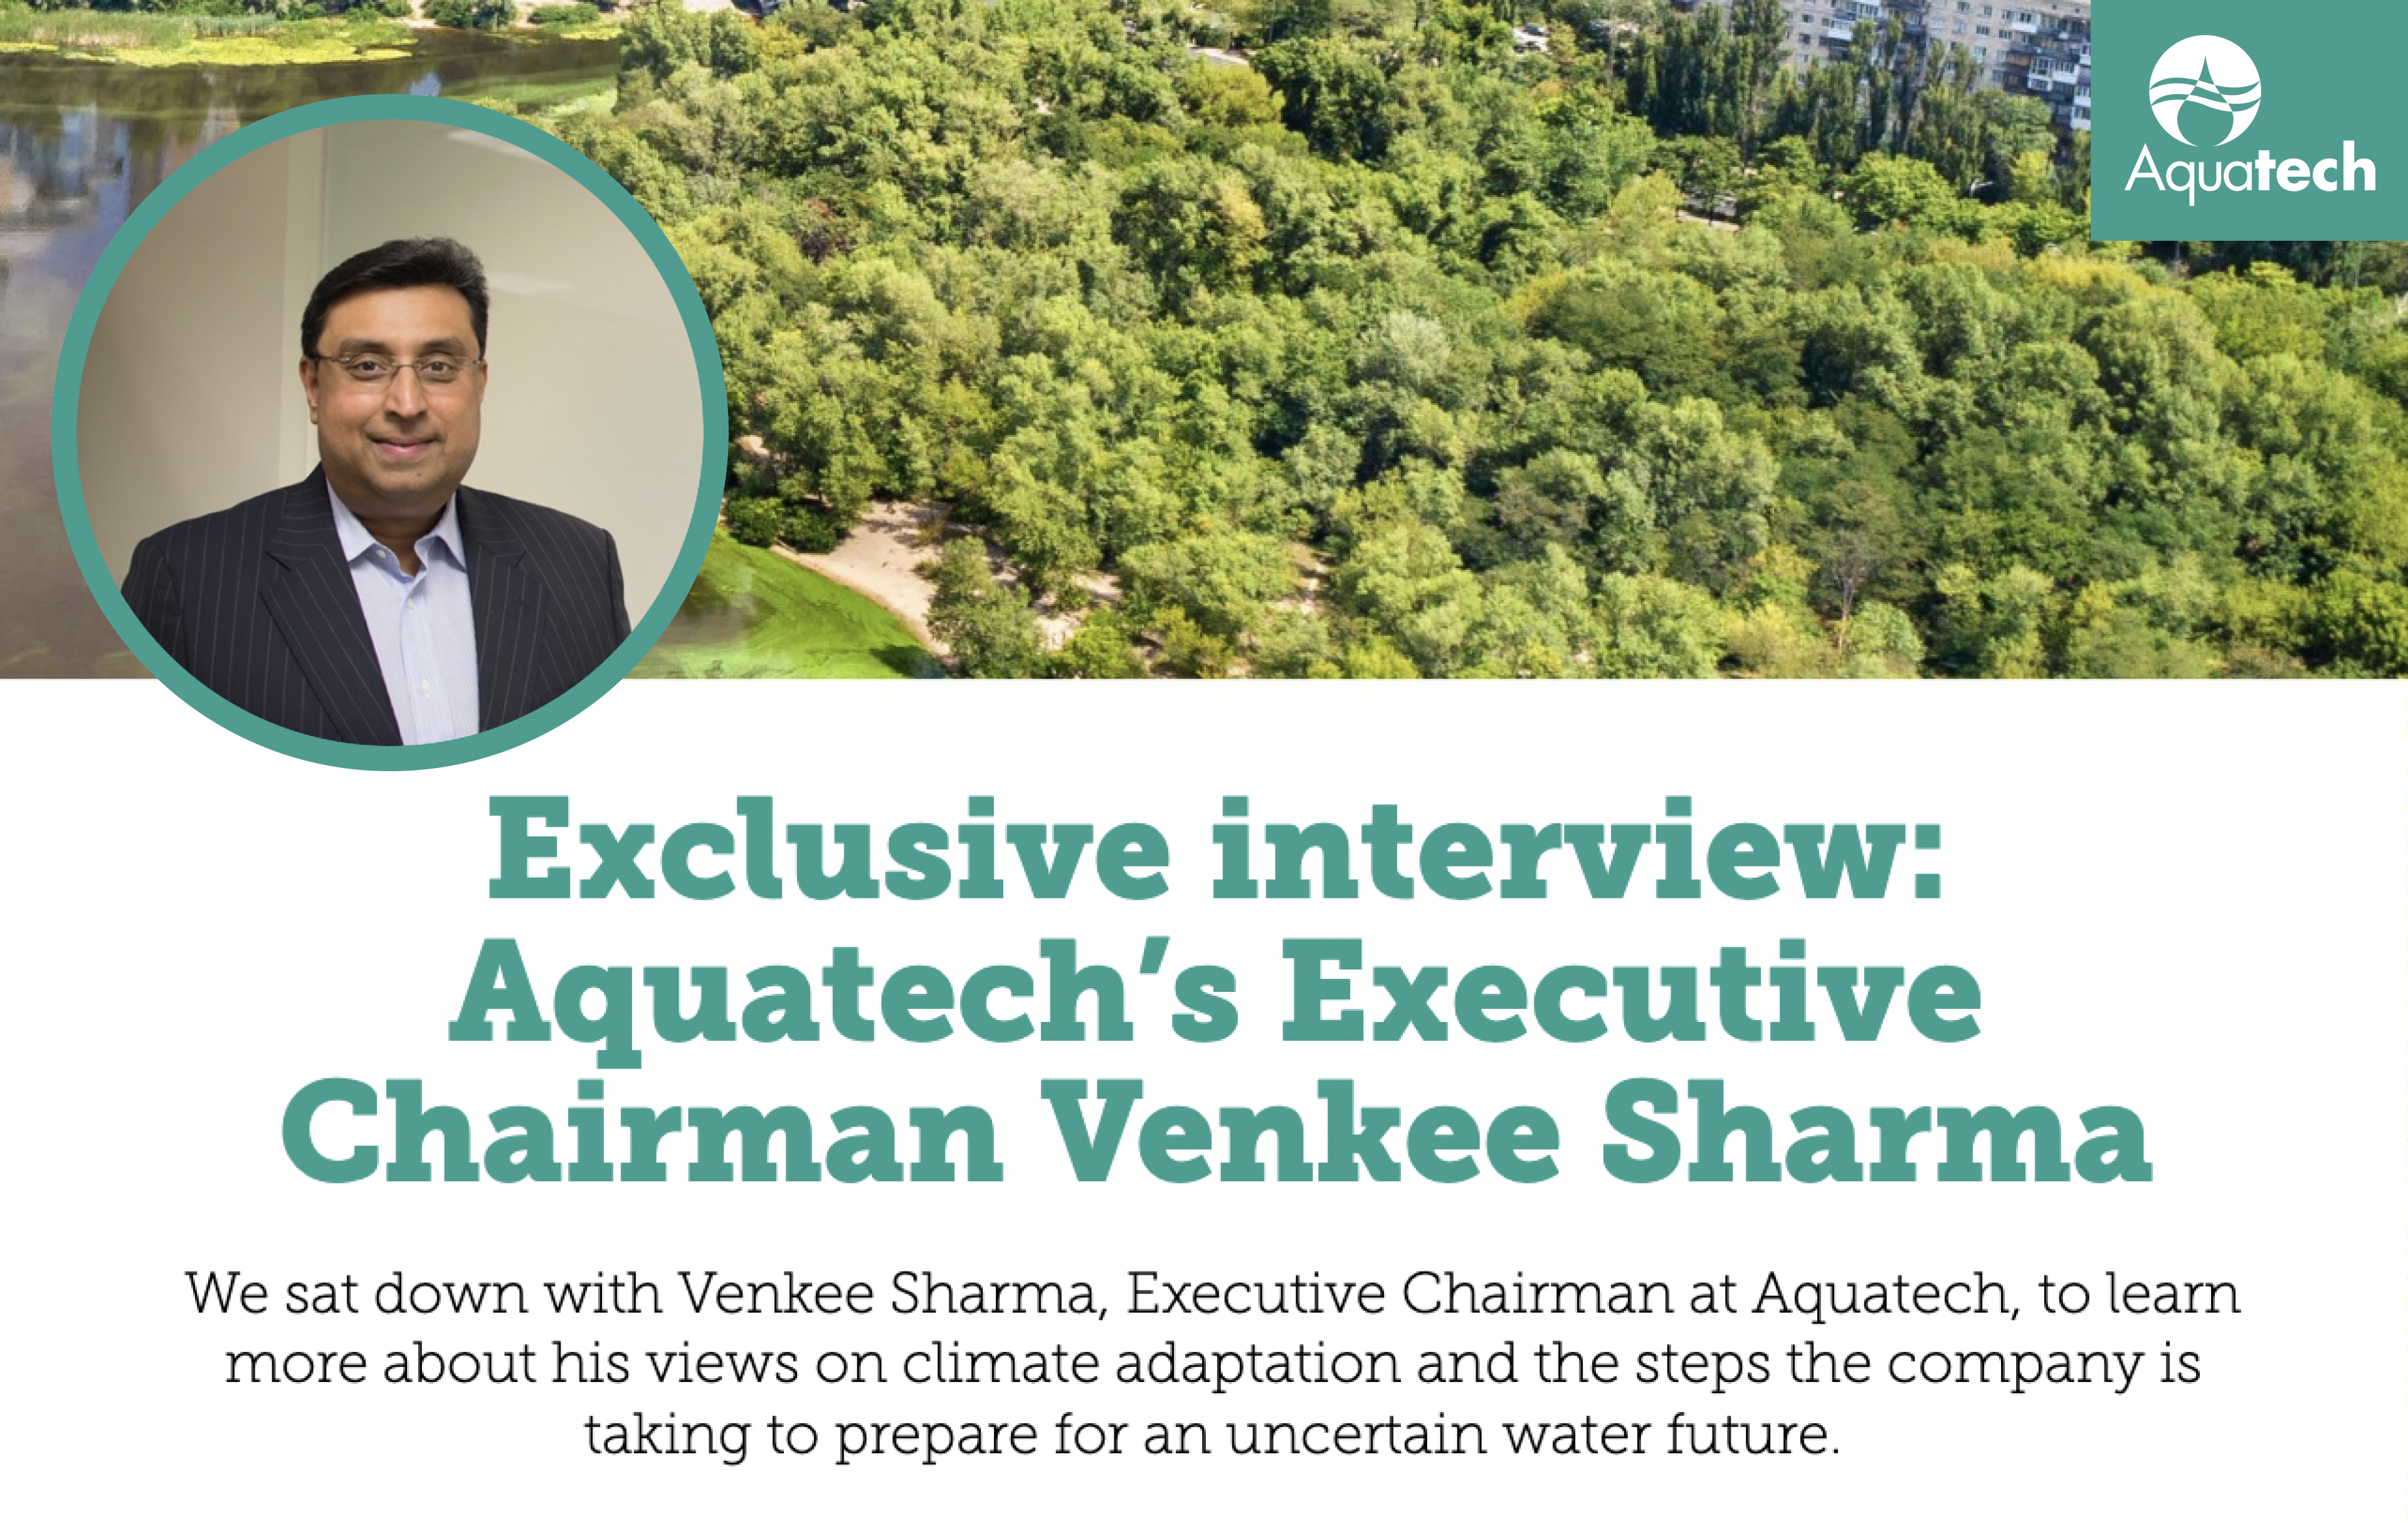 Interview: Venkee Sharma Shares His Views on Climate Change Adaptation with H2O Global News